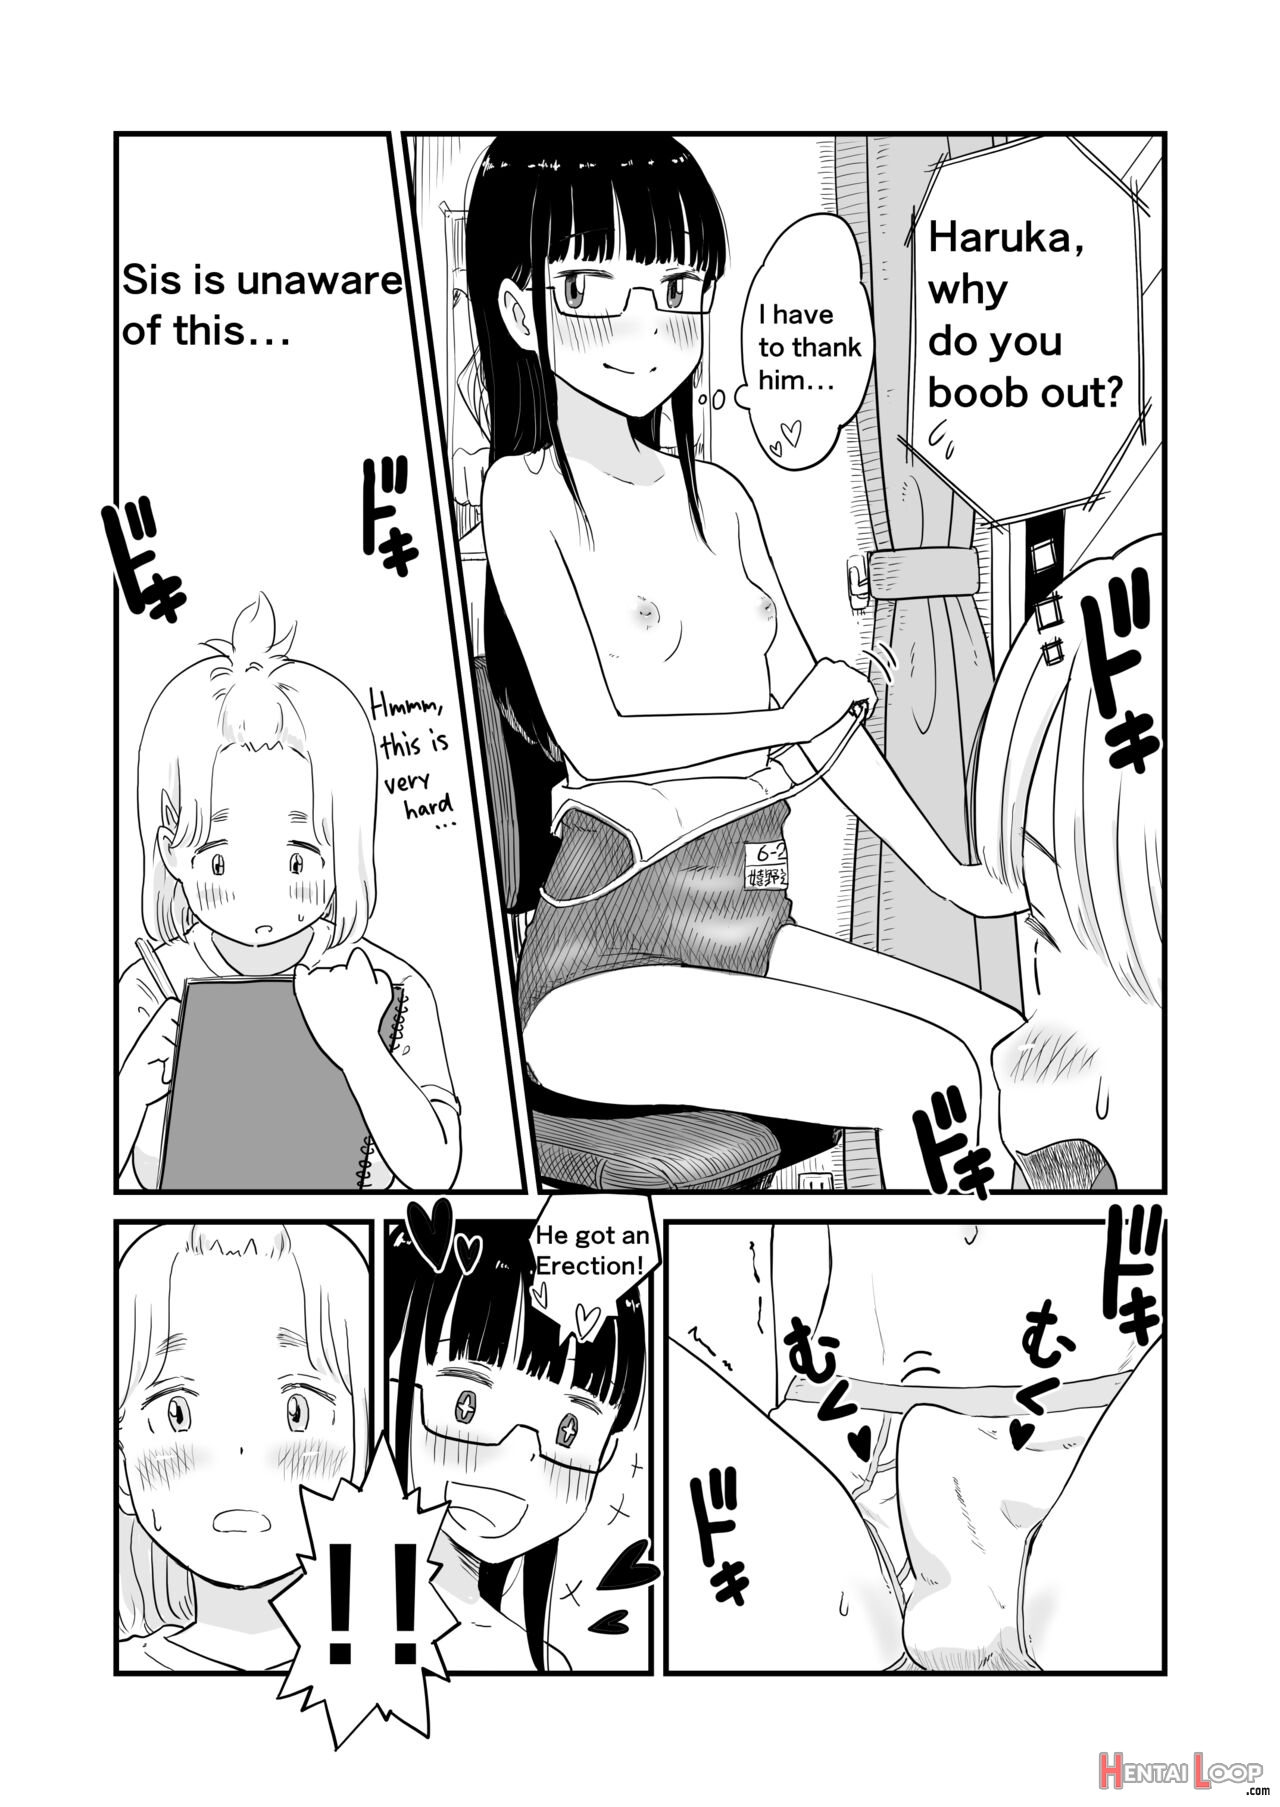 My Sister Is A Doujinshi Artist Of One-shota. page 9